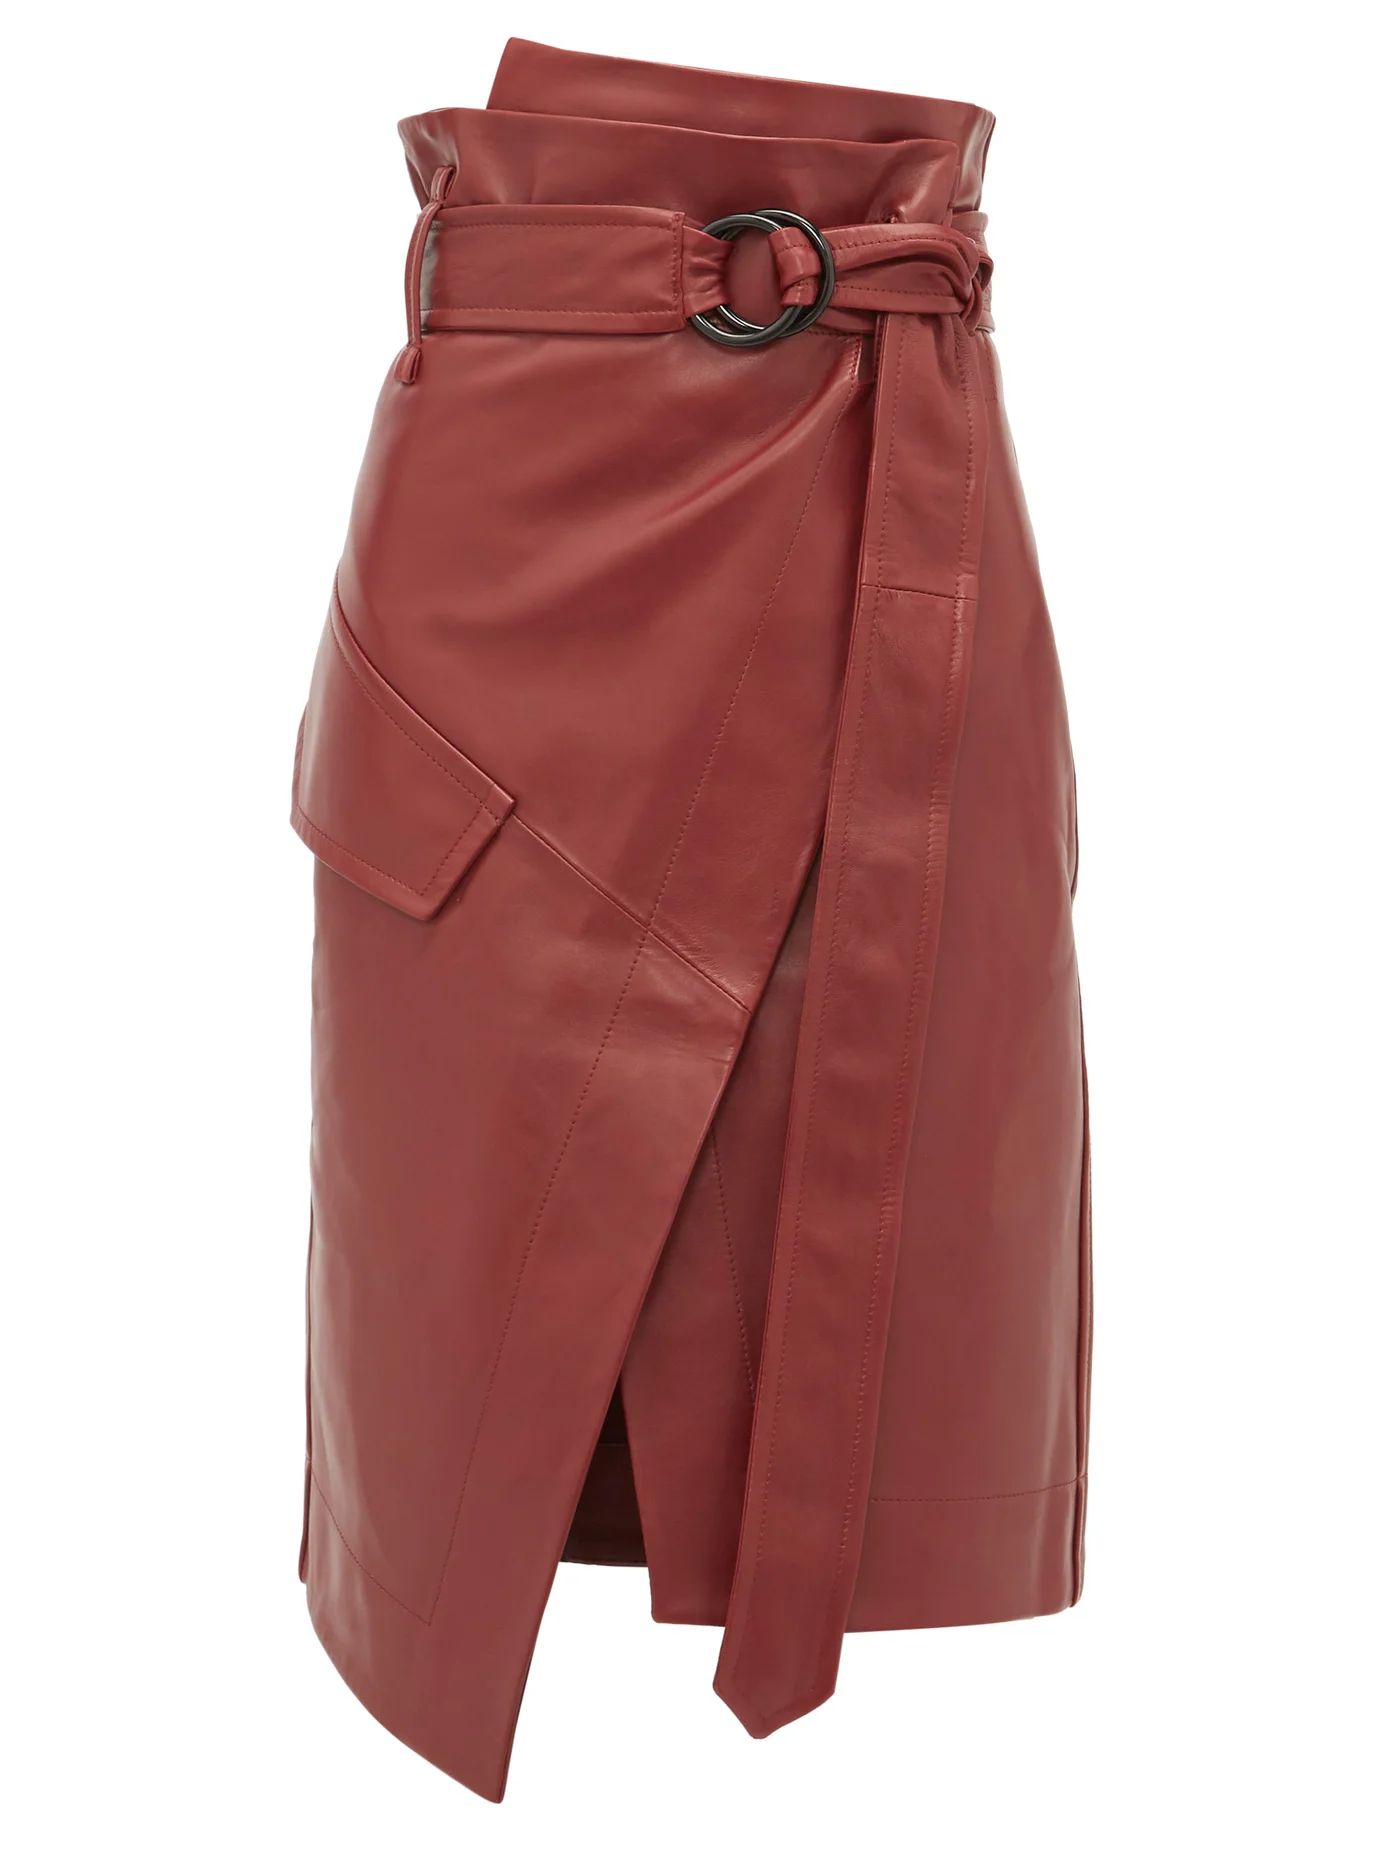 Rita high-rise leather skirt | Matches (US)